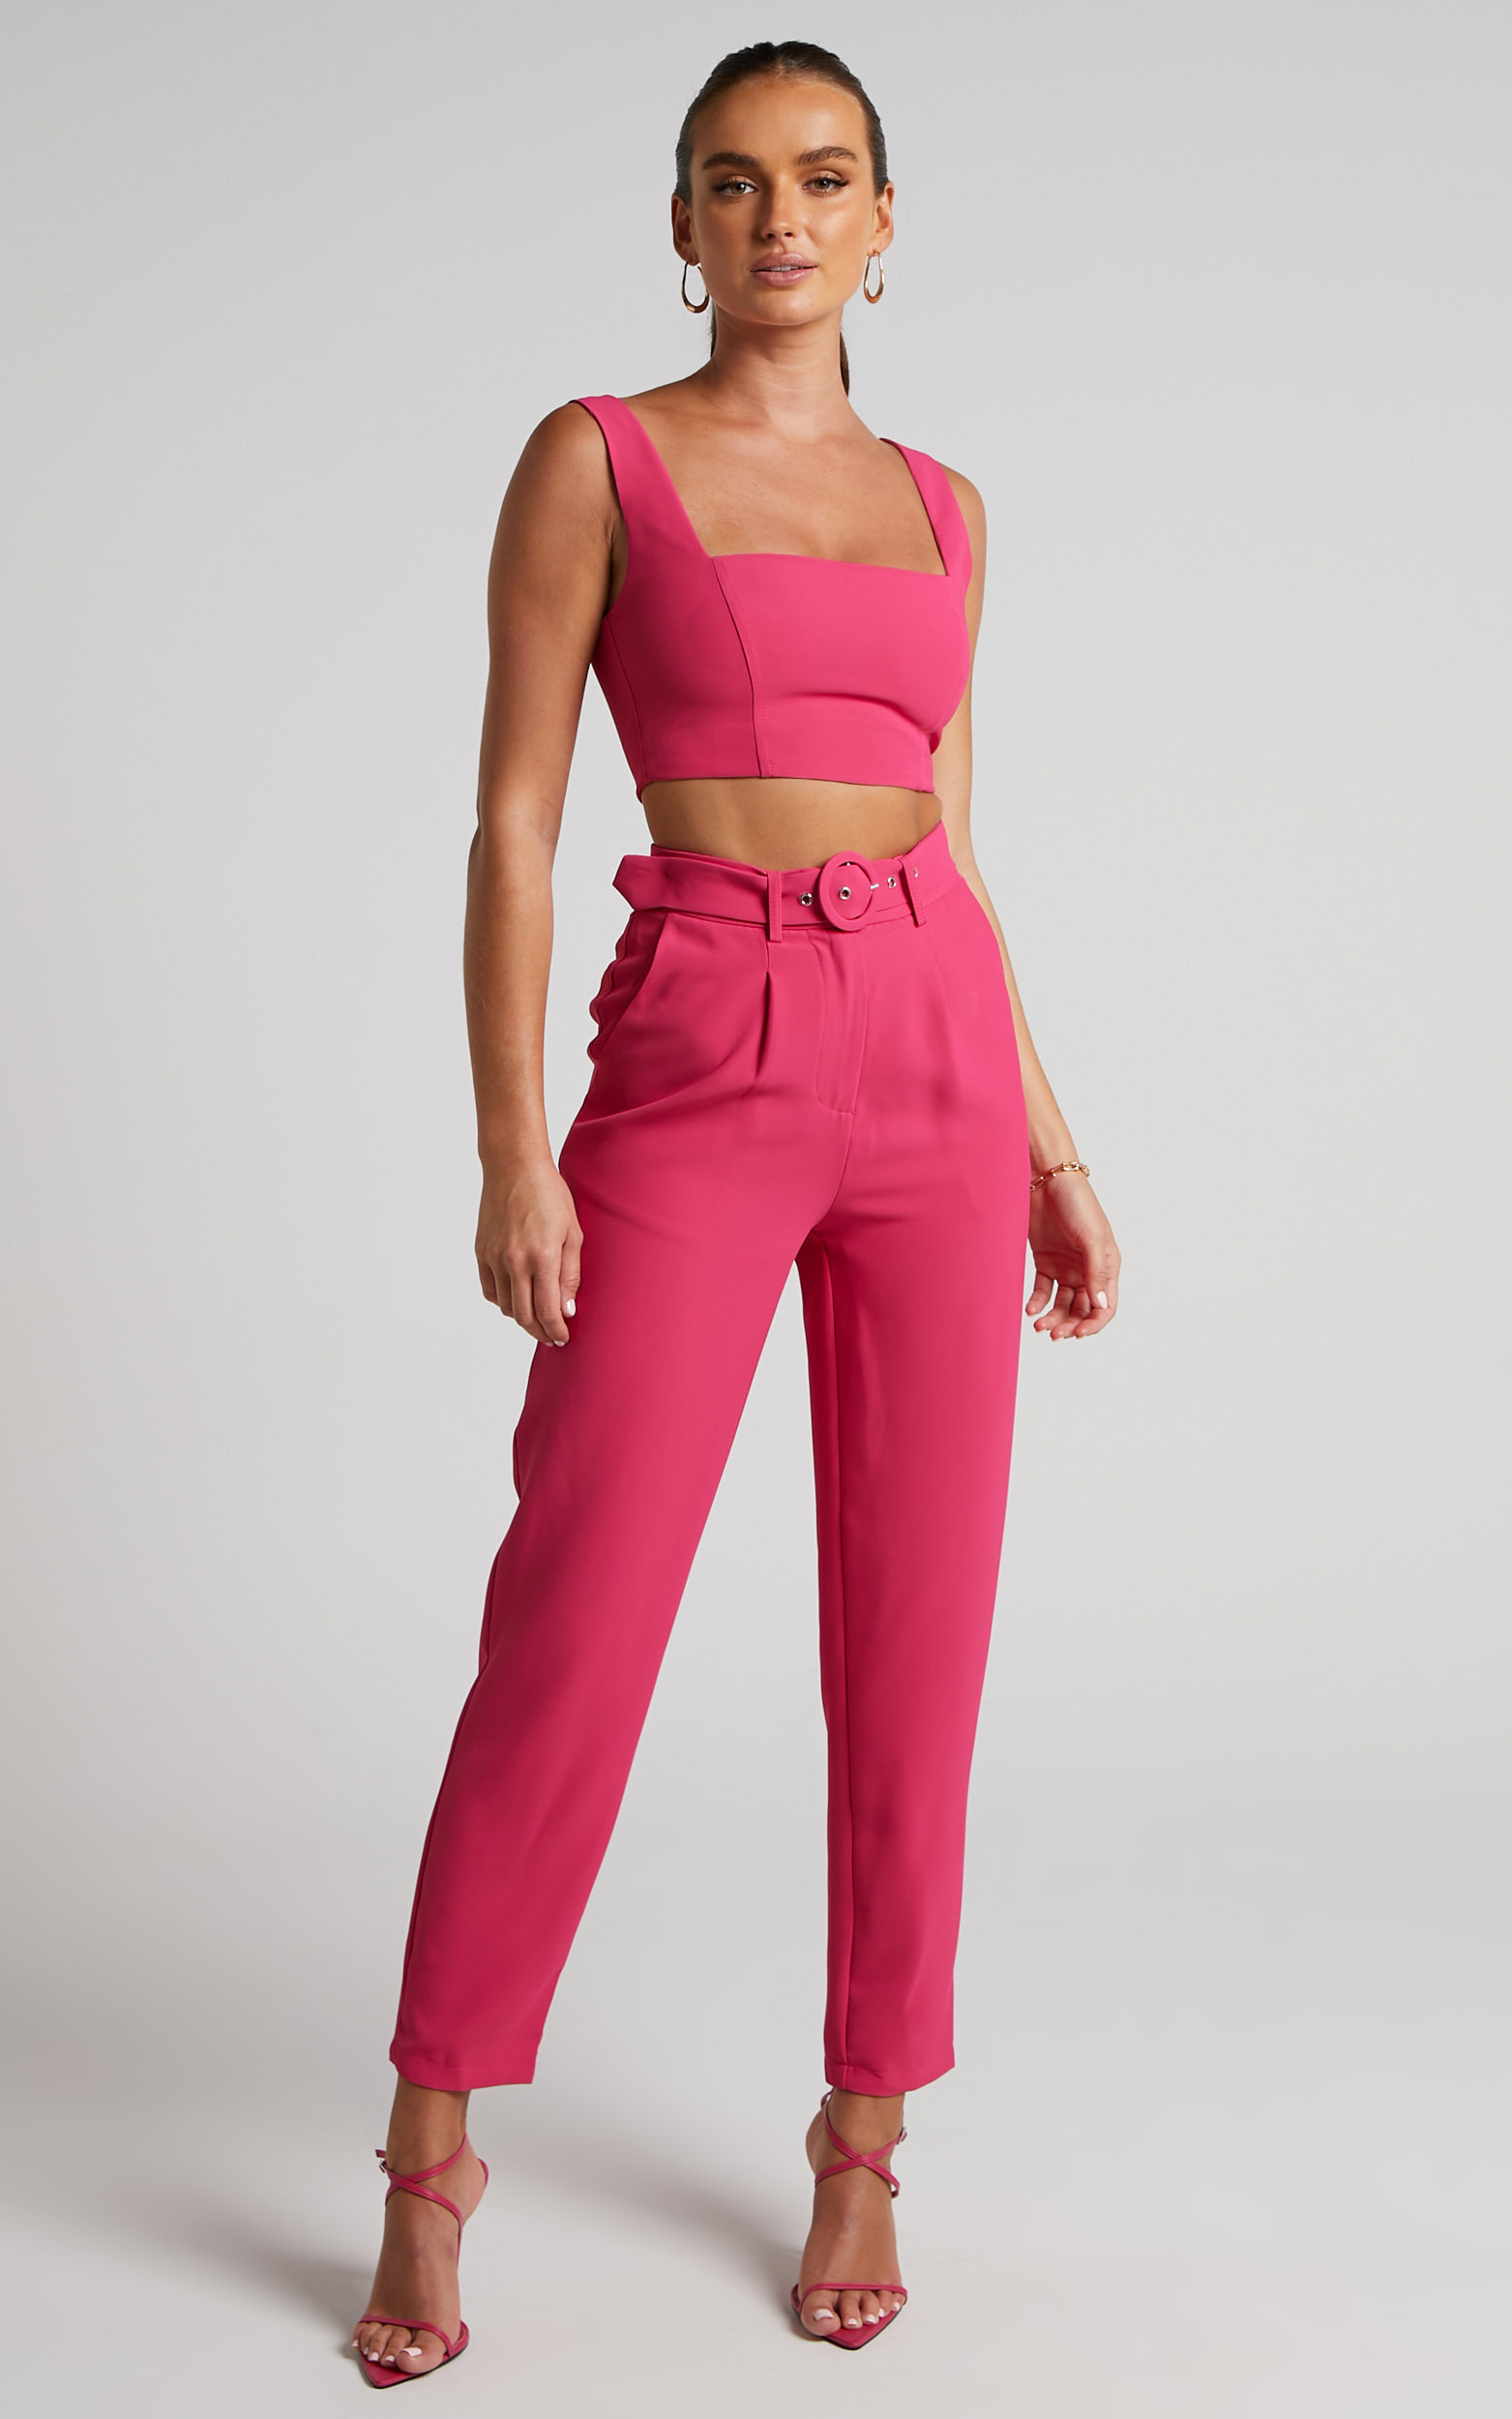 Reyna Two Piece Set - Crop Top and Tailored Pants in Pink - 04, PNK1, hi-res image number null